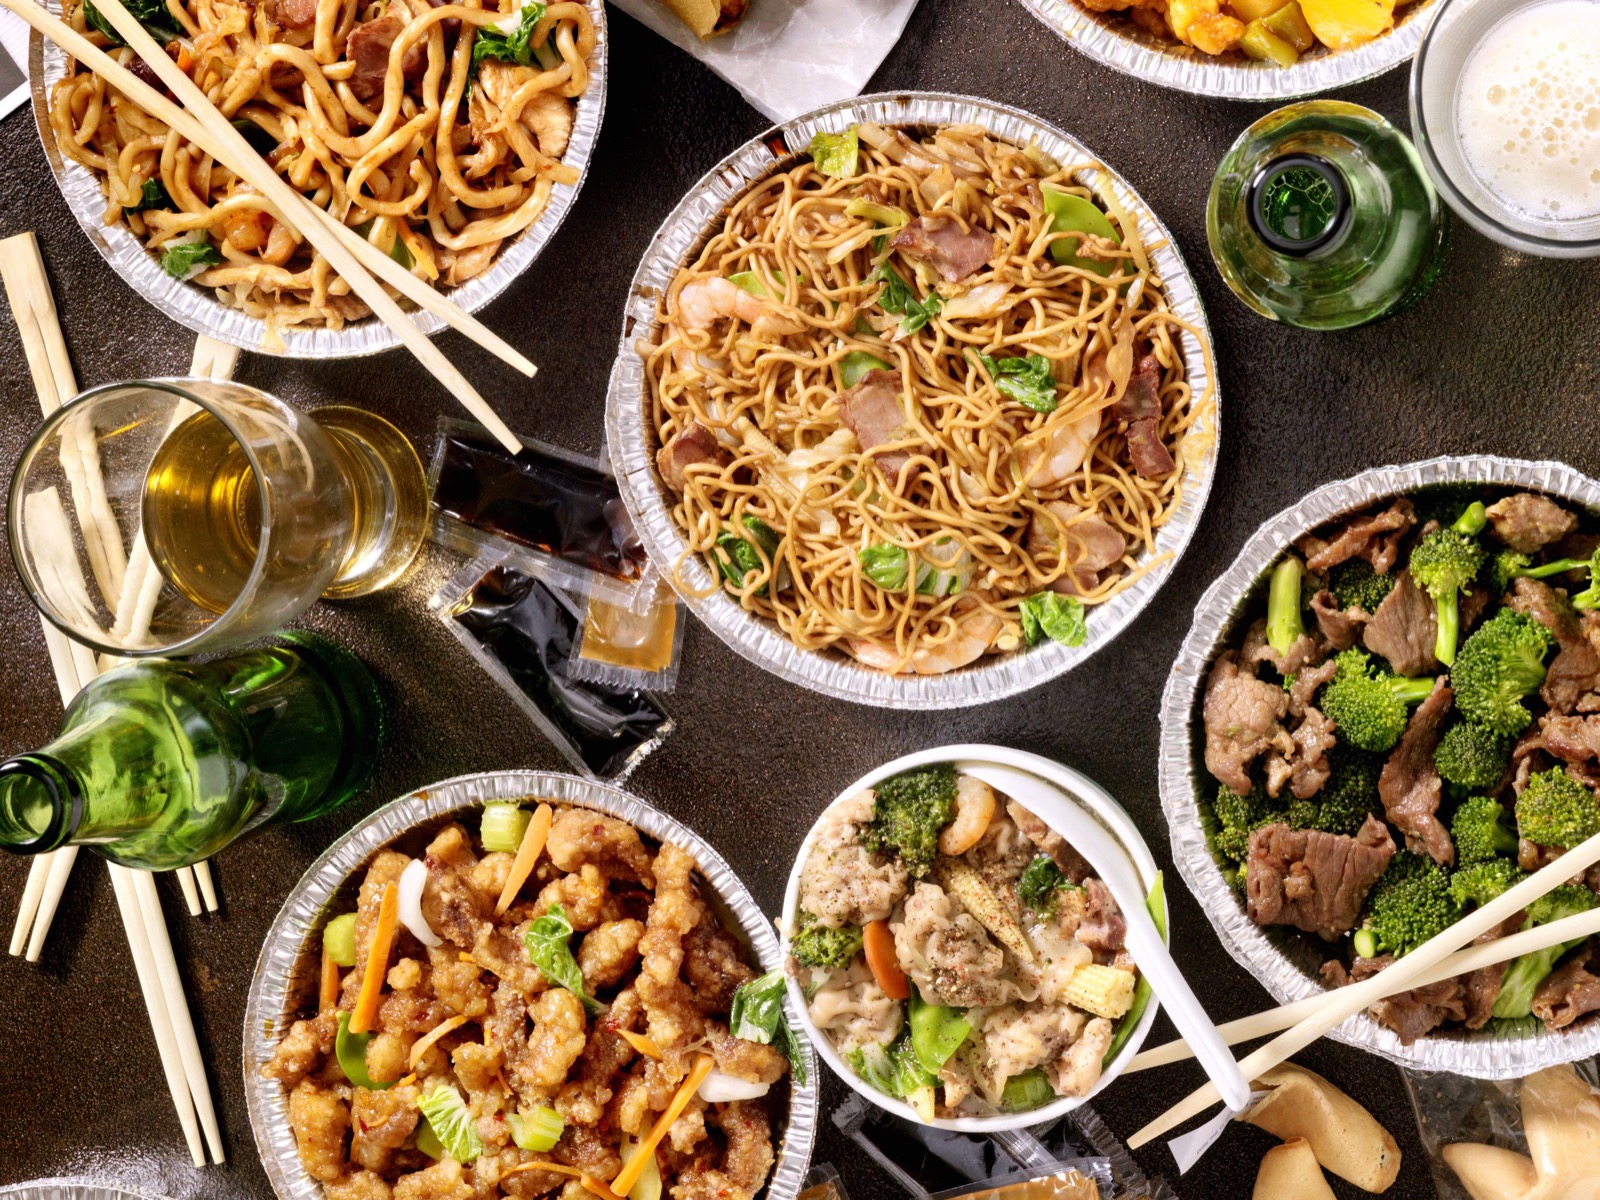 🍕 What’s Your Age Based on Your Comfort Food Choices? 🍰 Chinese Cuisine